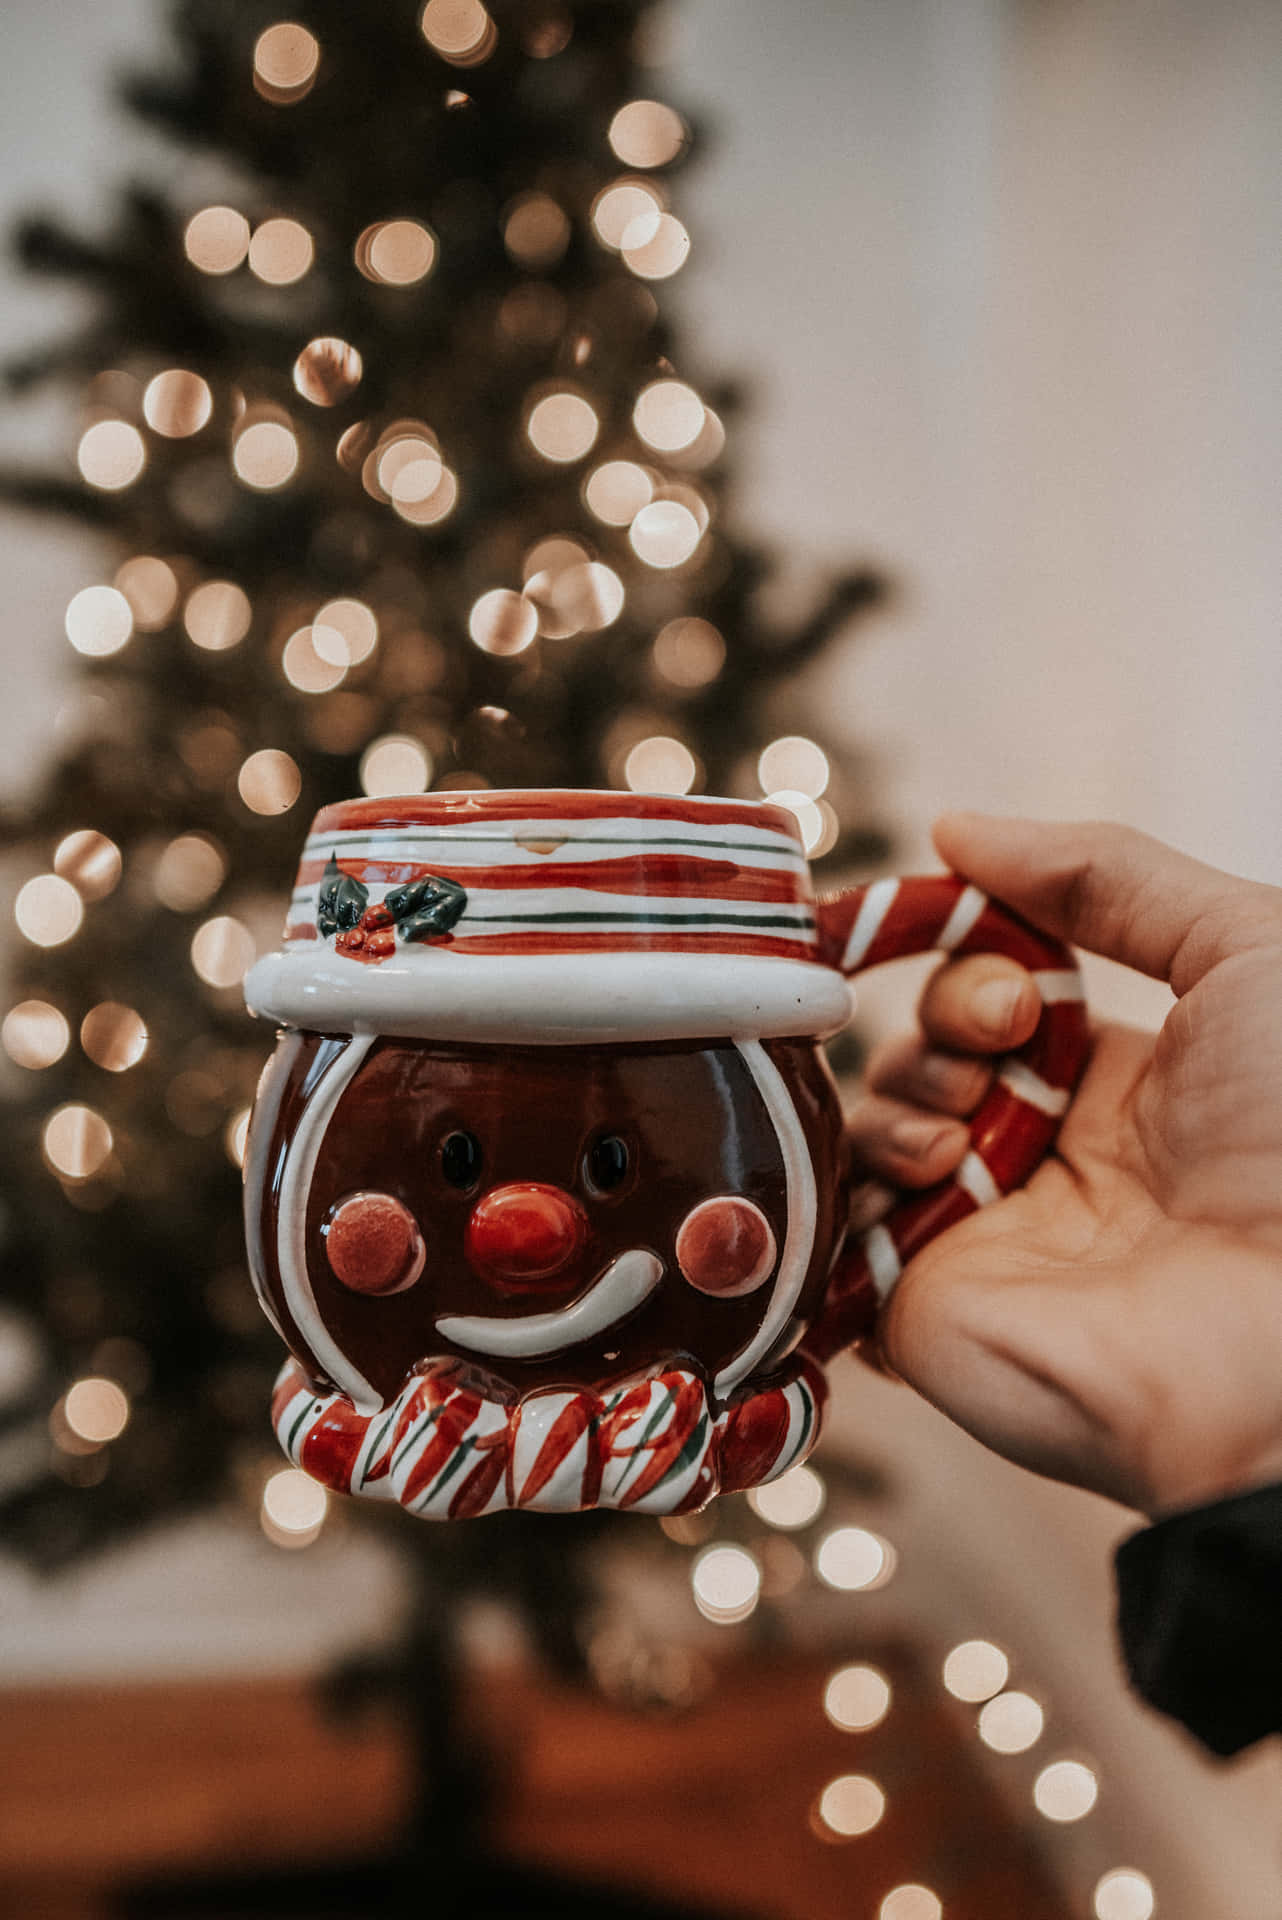 A person holding a Christmas mug in front of a Christmas tree. - Cute Christmas